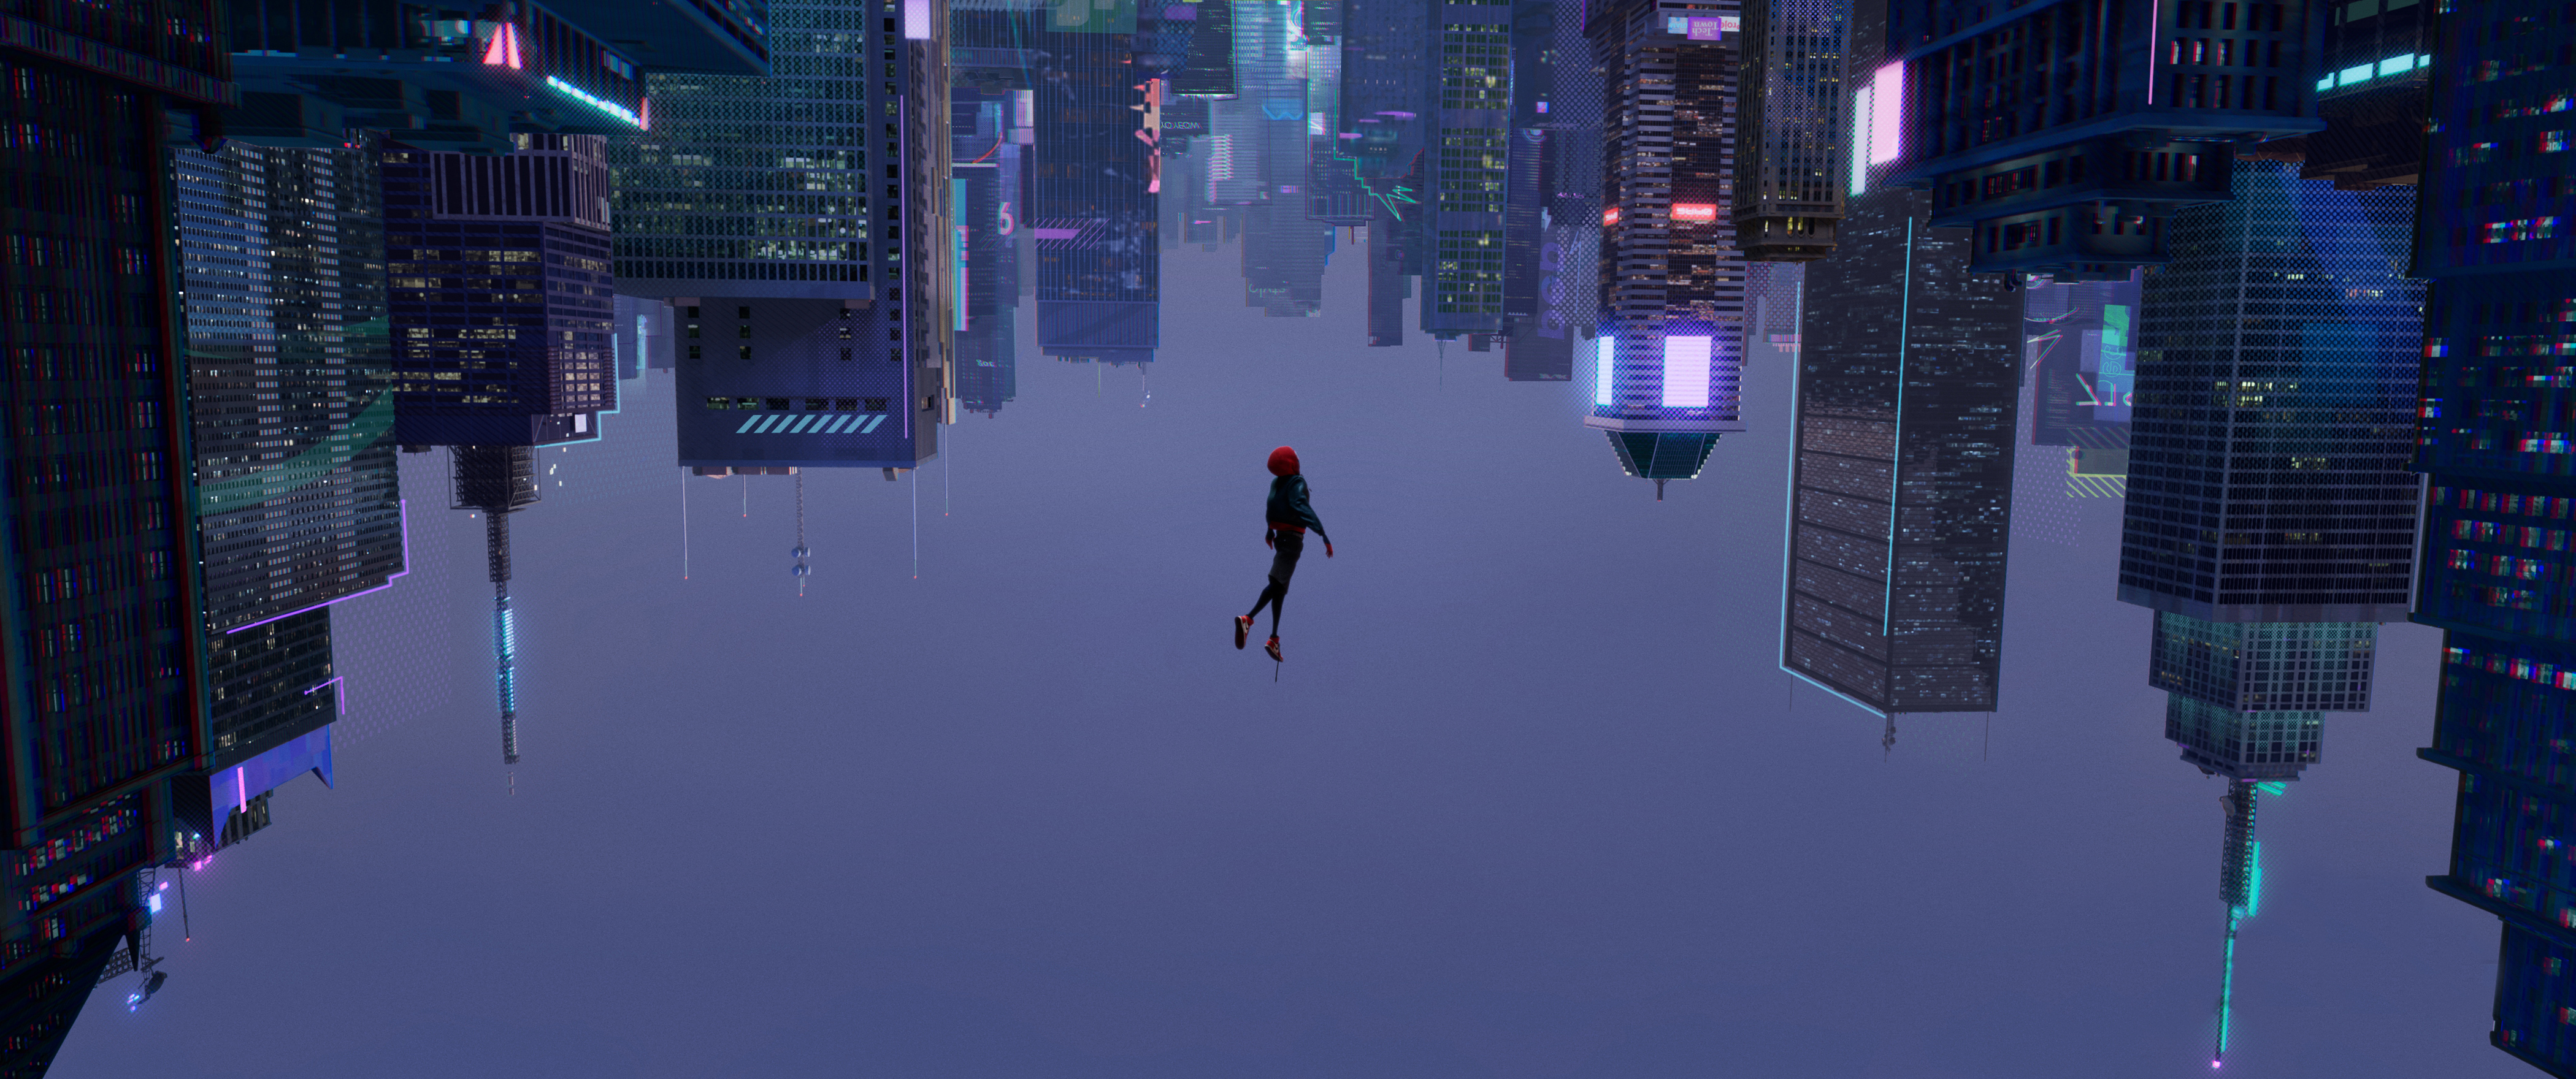 Spiderman Into The Spider Verse 2018 Wallpaper Hd Movies 4k